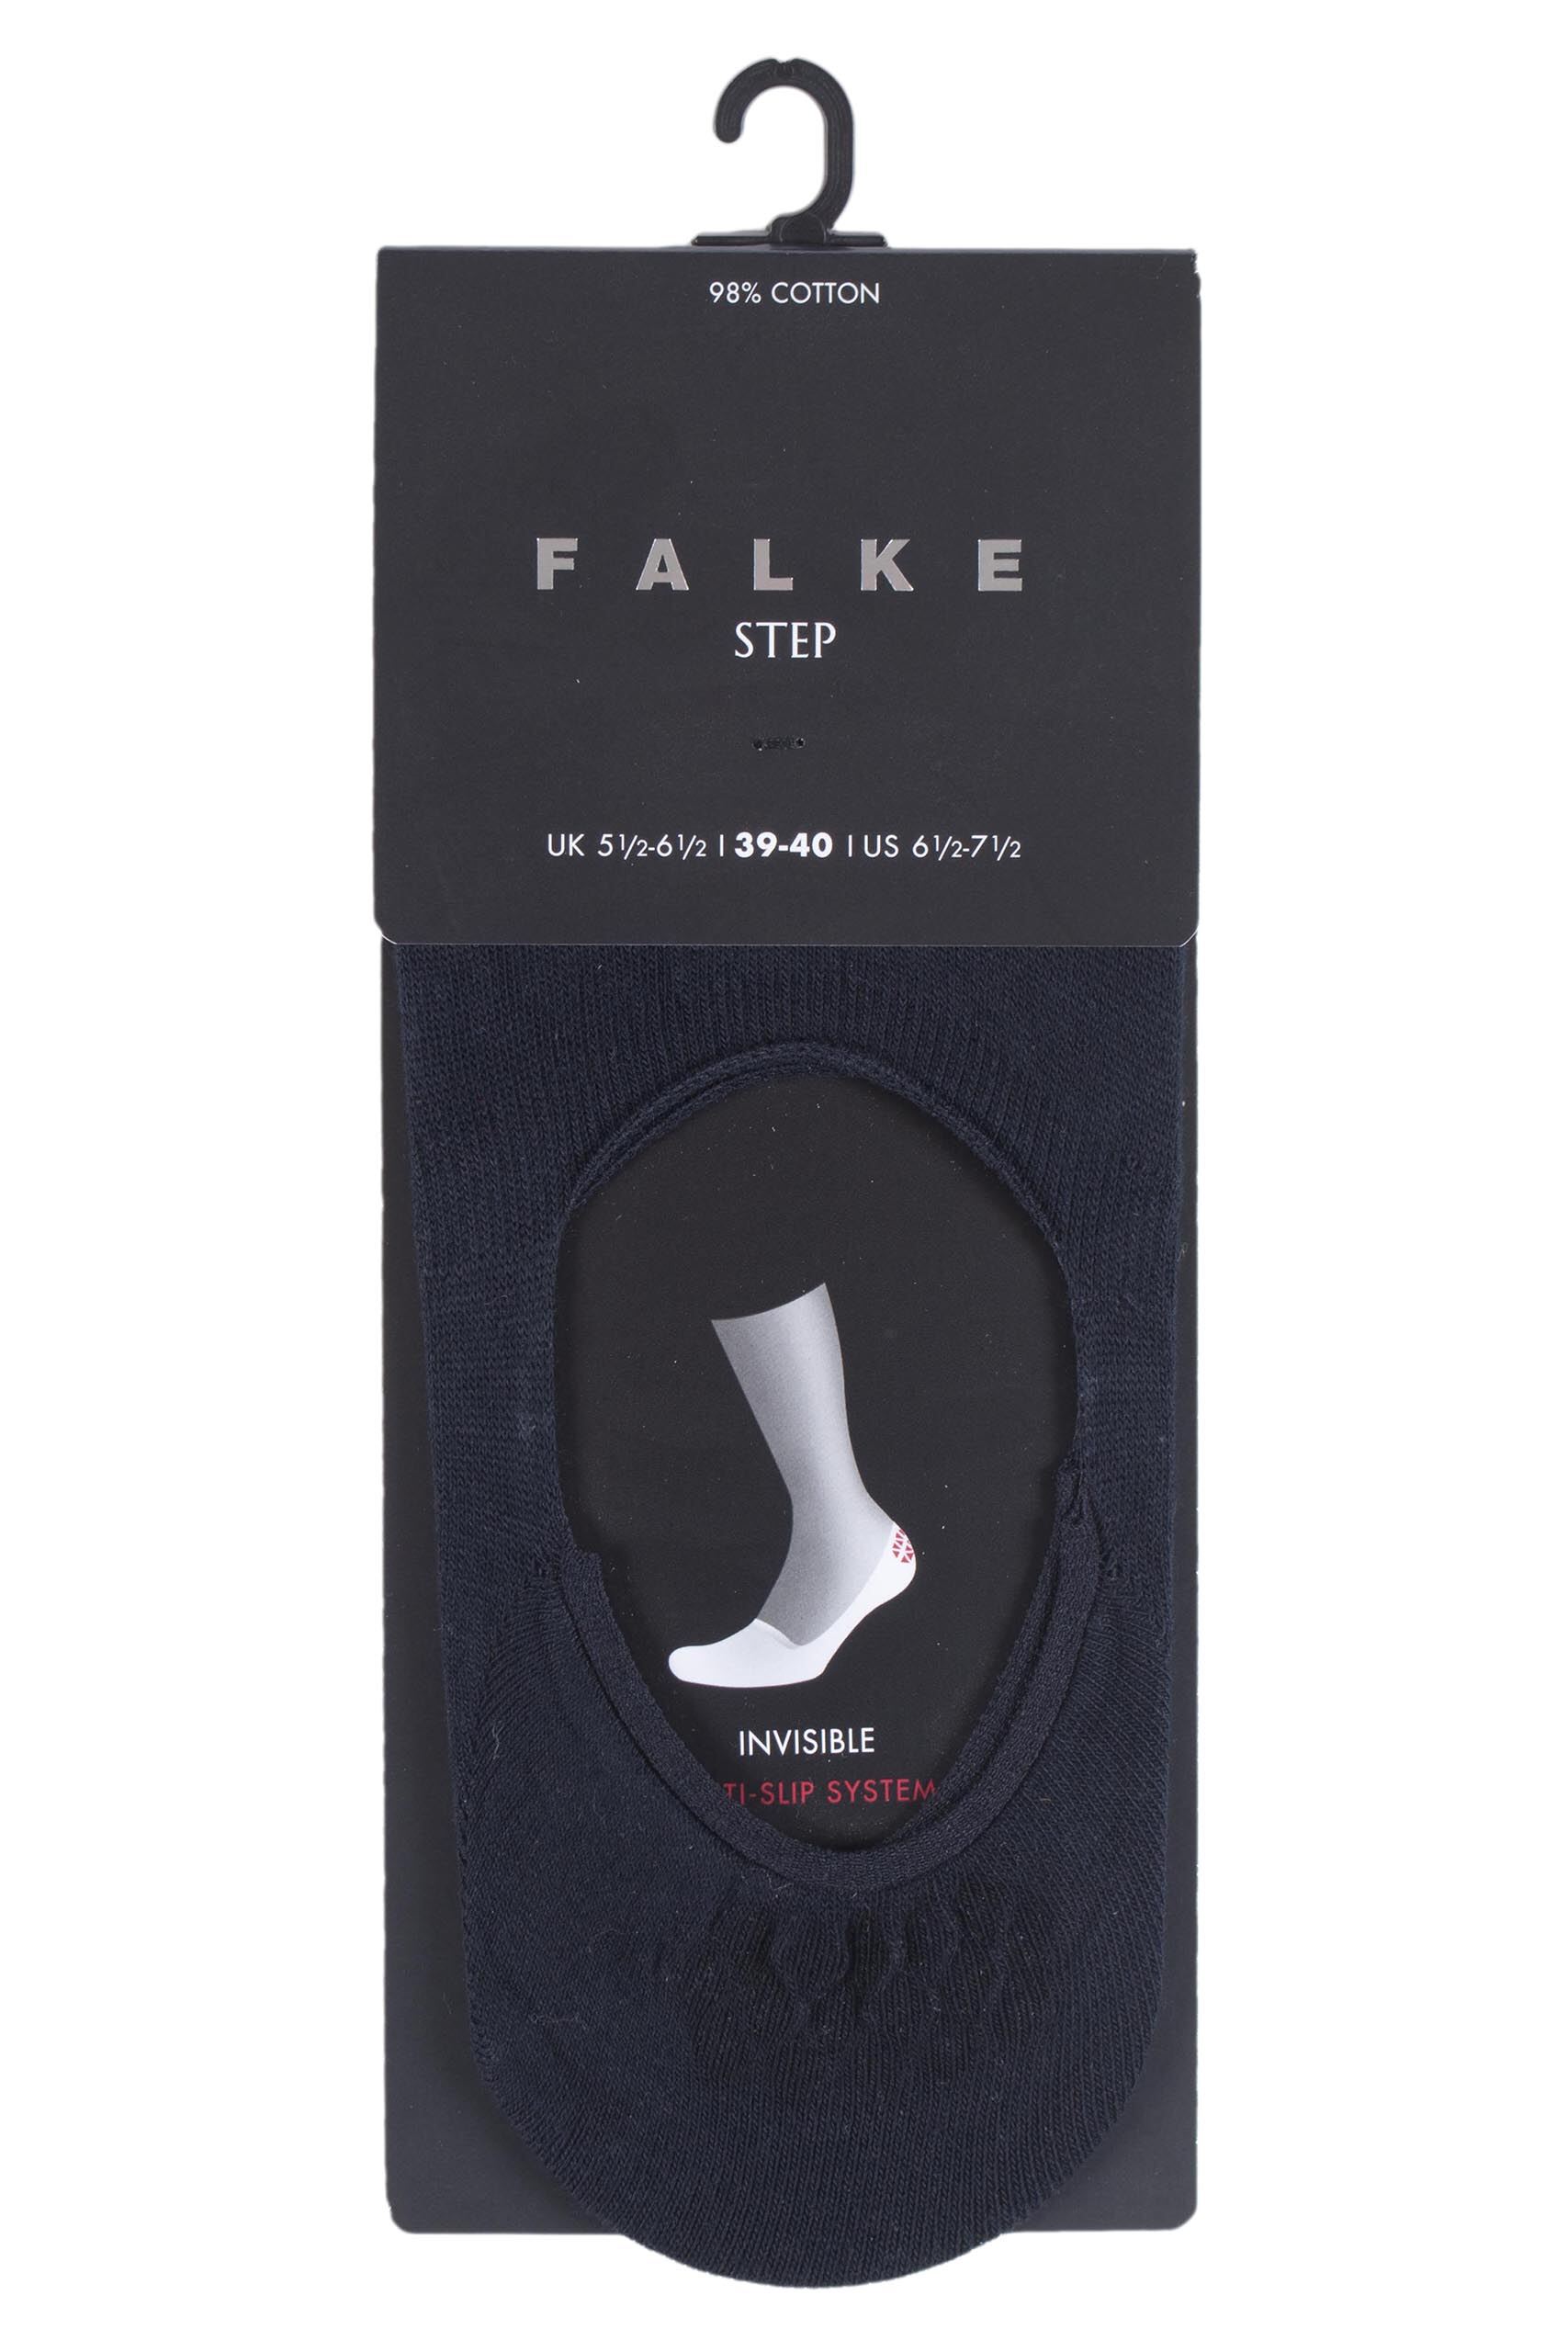  Falke Invisible Step Shoe Liners